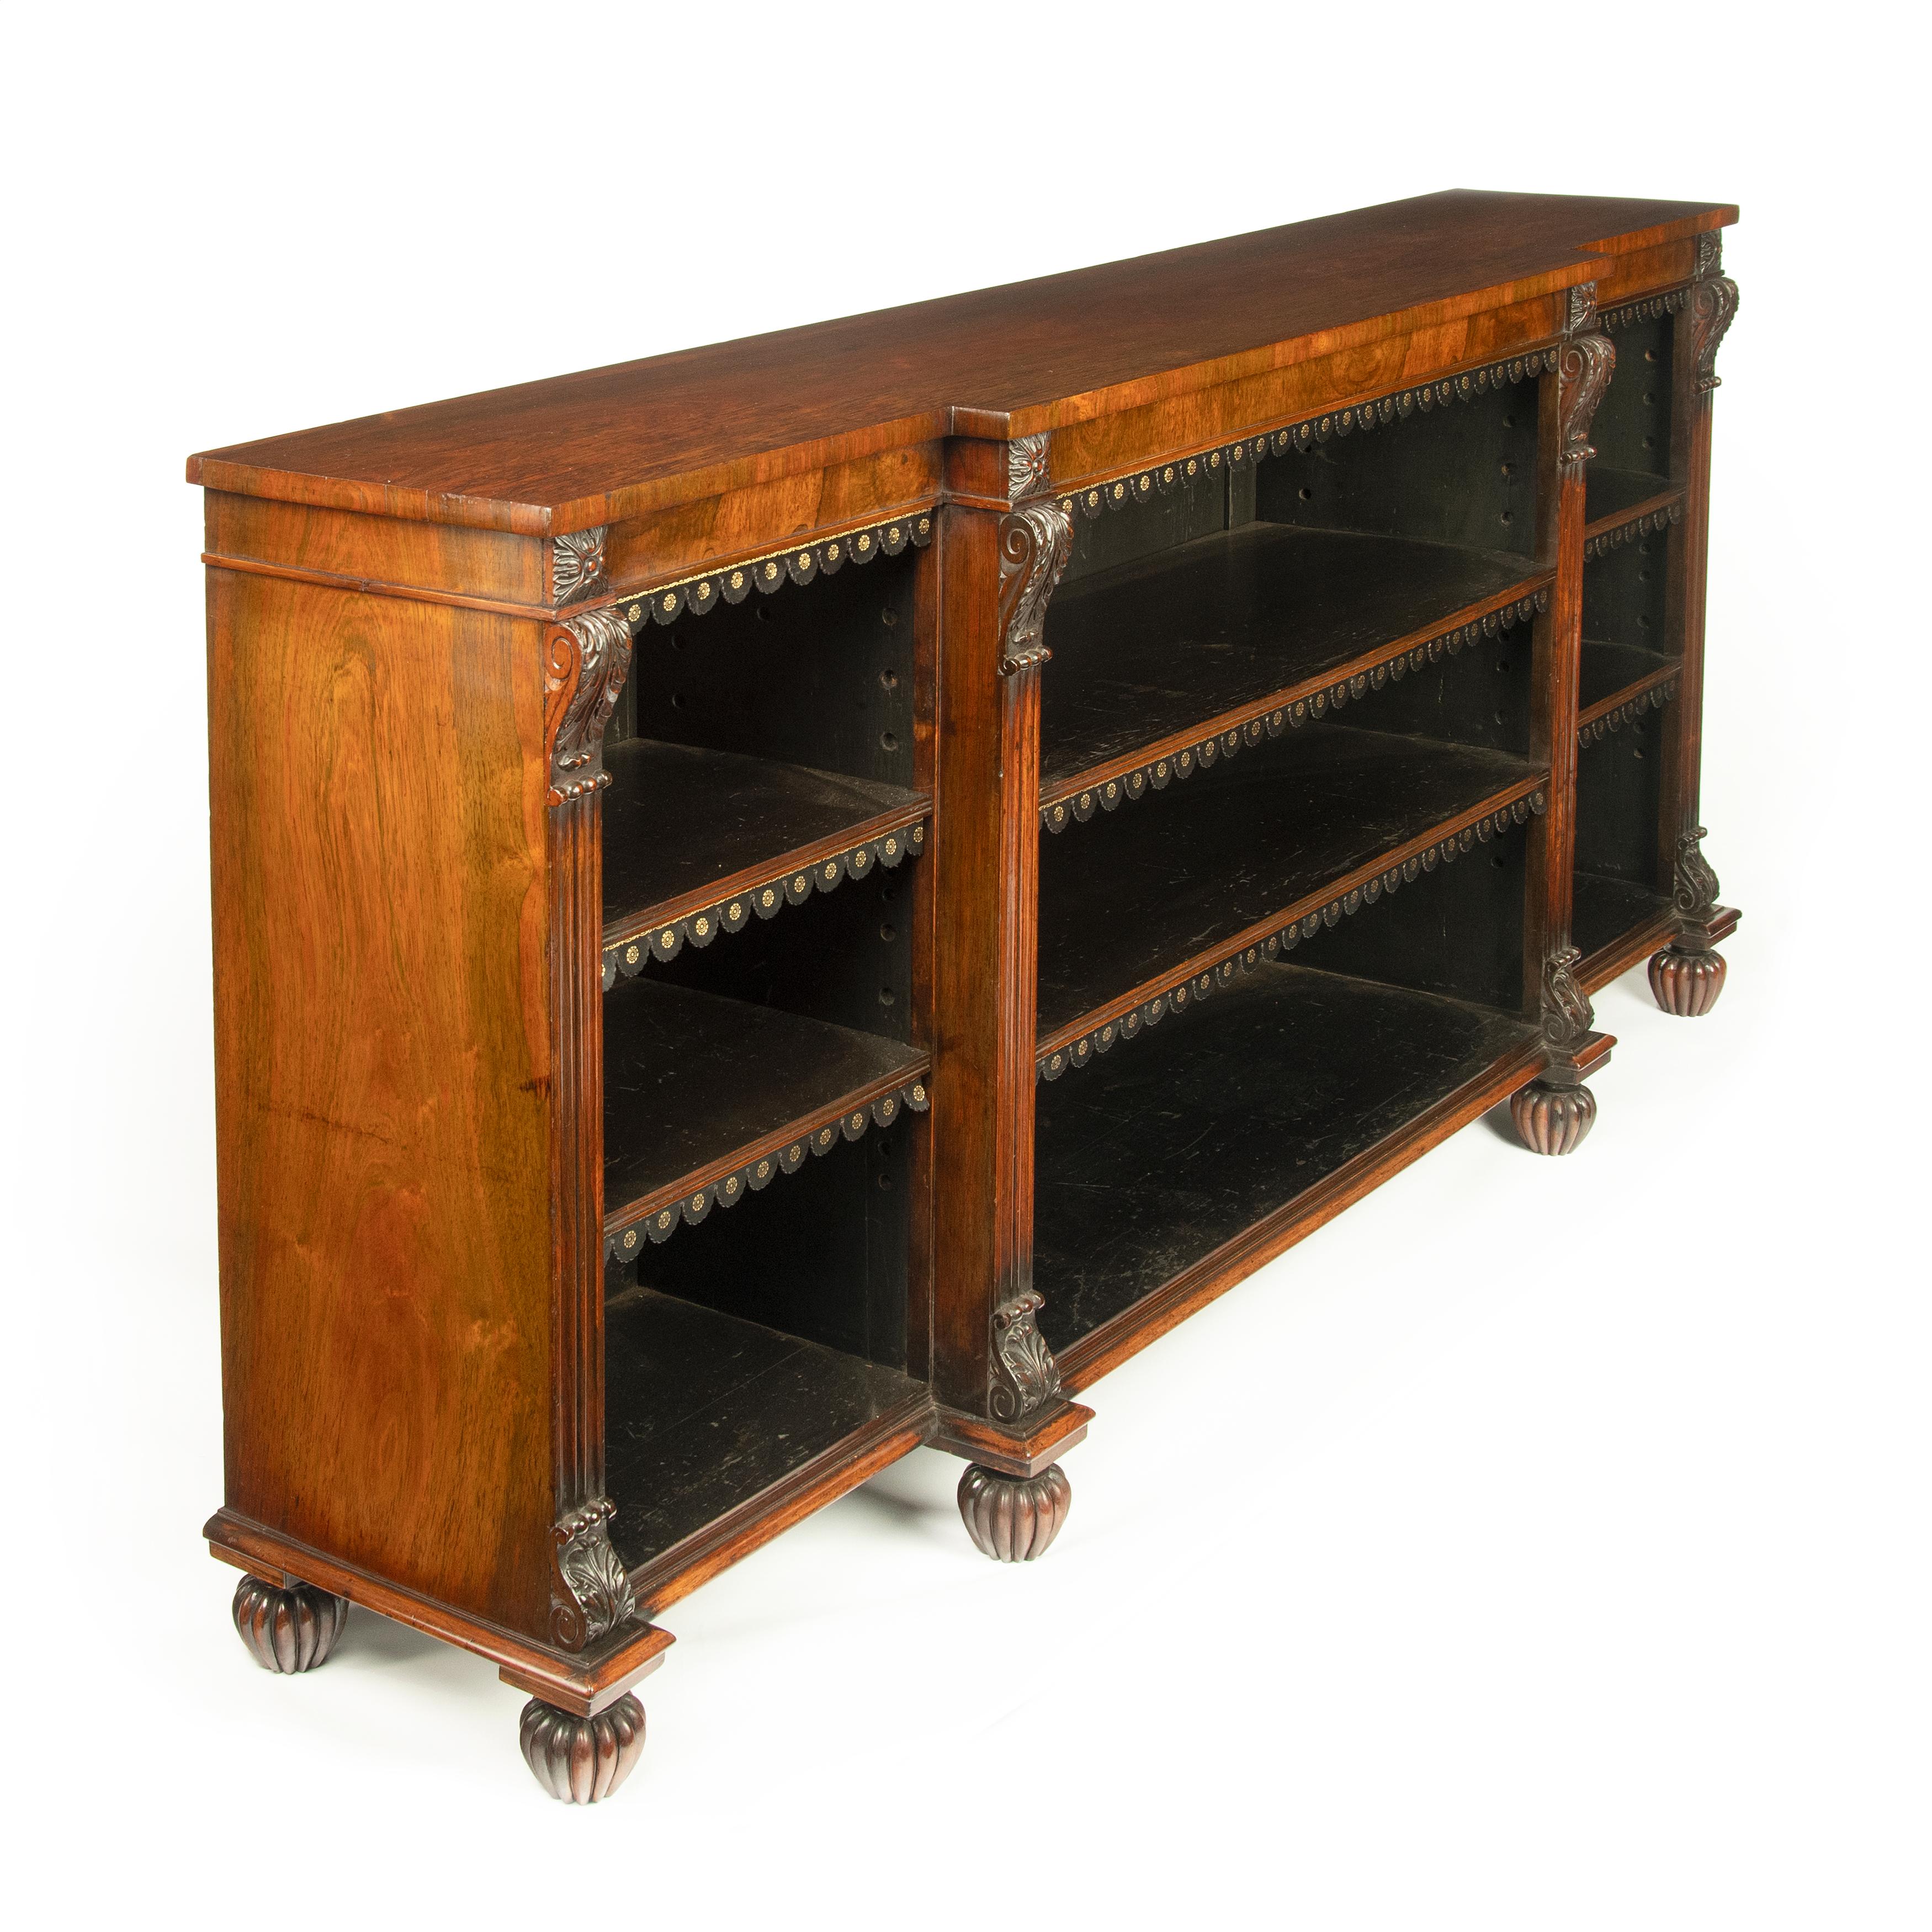 A late Regency rosewood breakfront open bookcase, attributed to Gillows, of rectangular form with three adjustable shelves, with tooled leather dust fringes, divided by four fluted pilasters decorated with scrolling corbels and acanthus carved